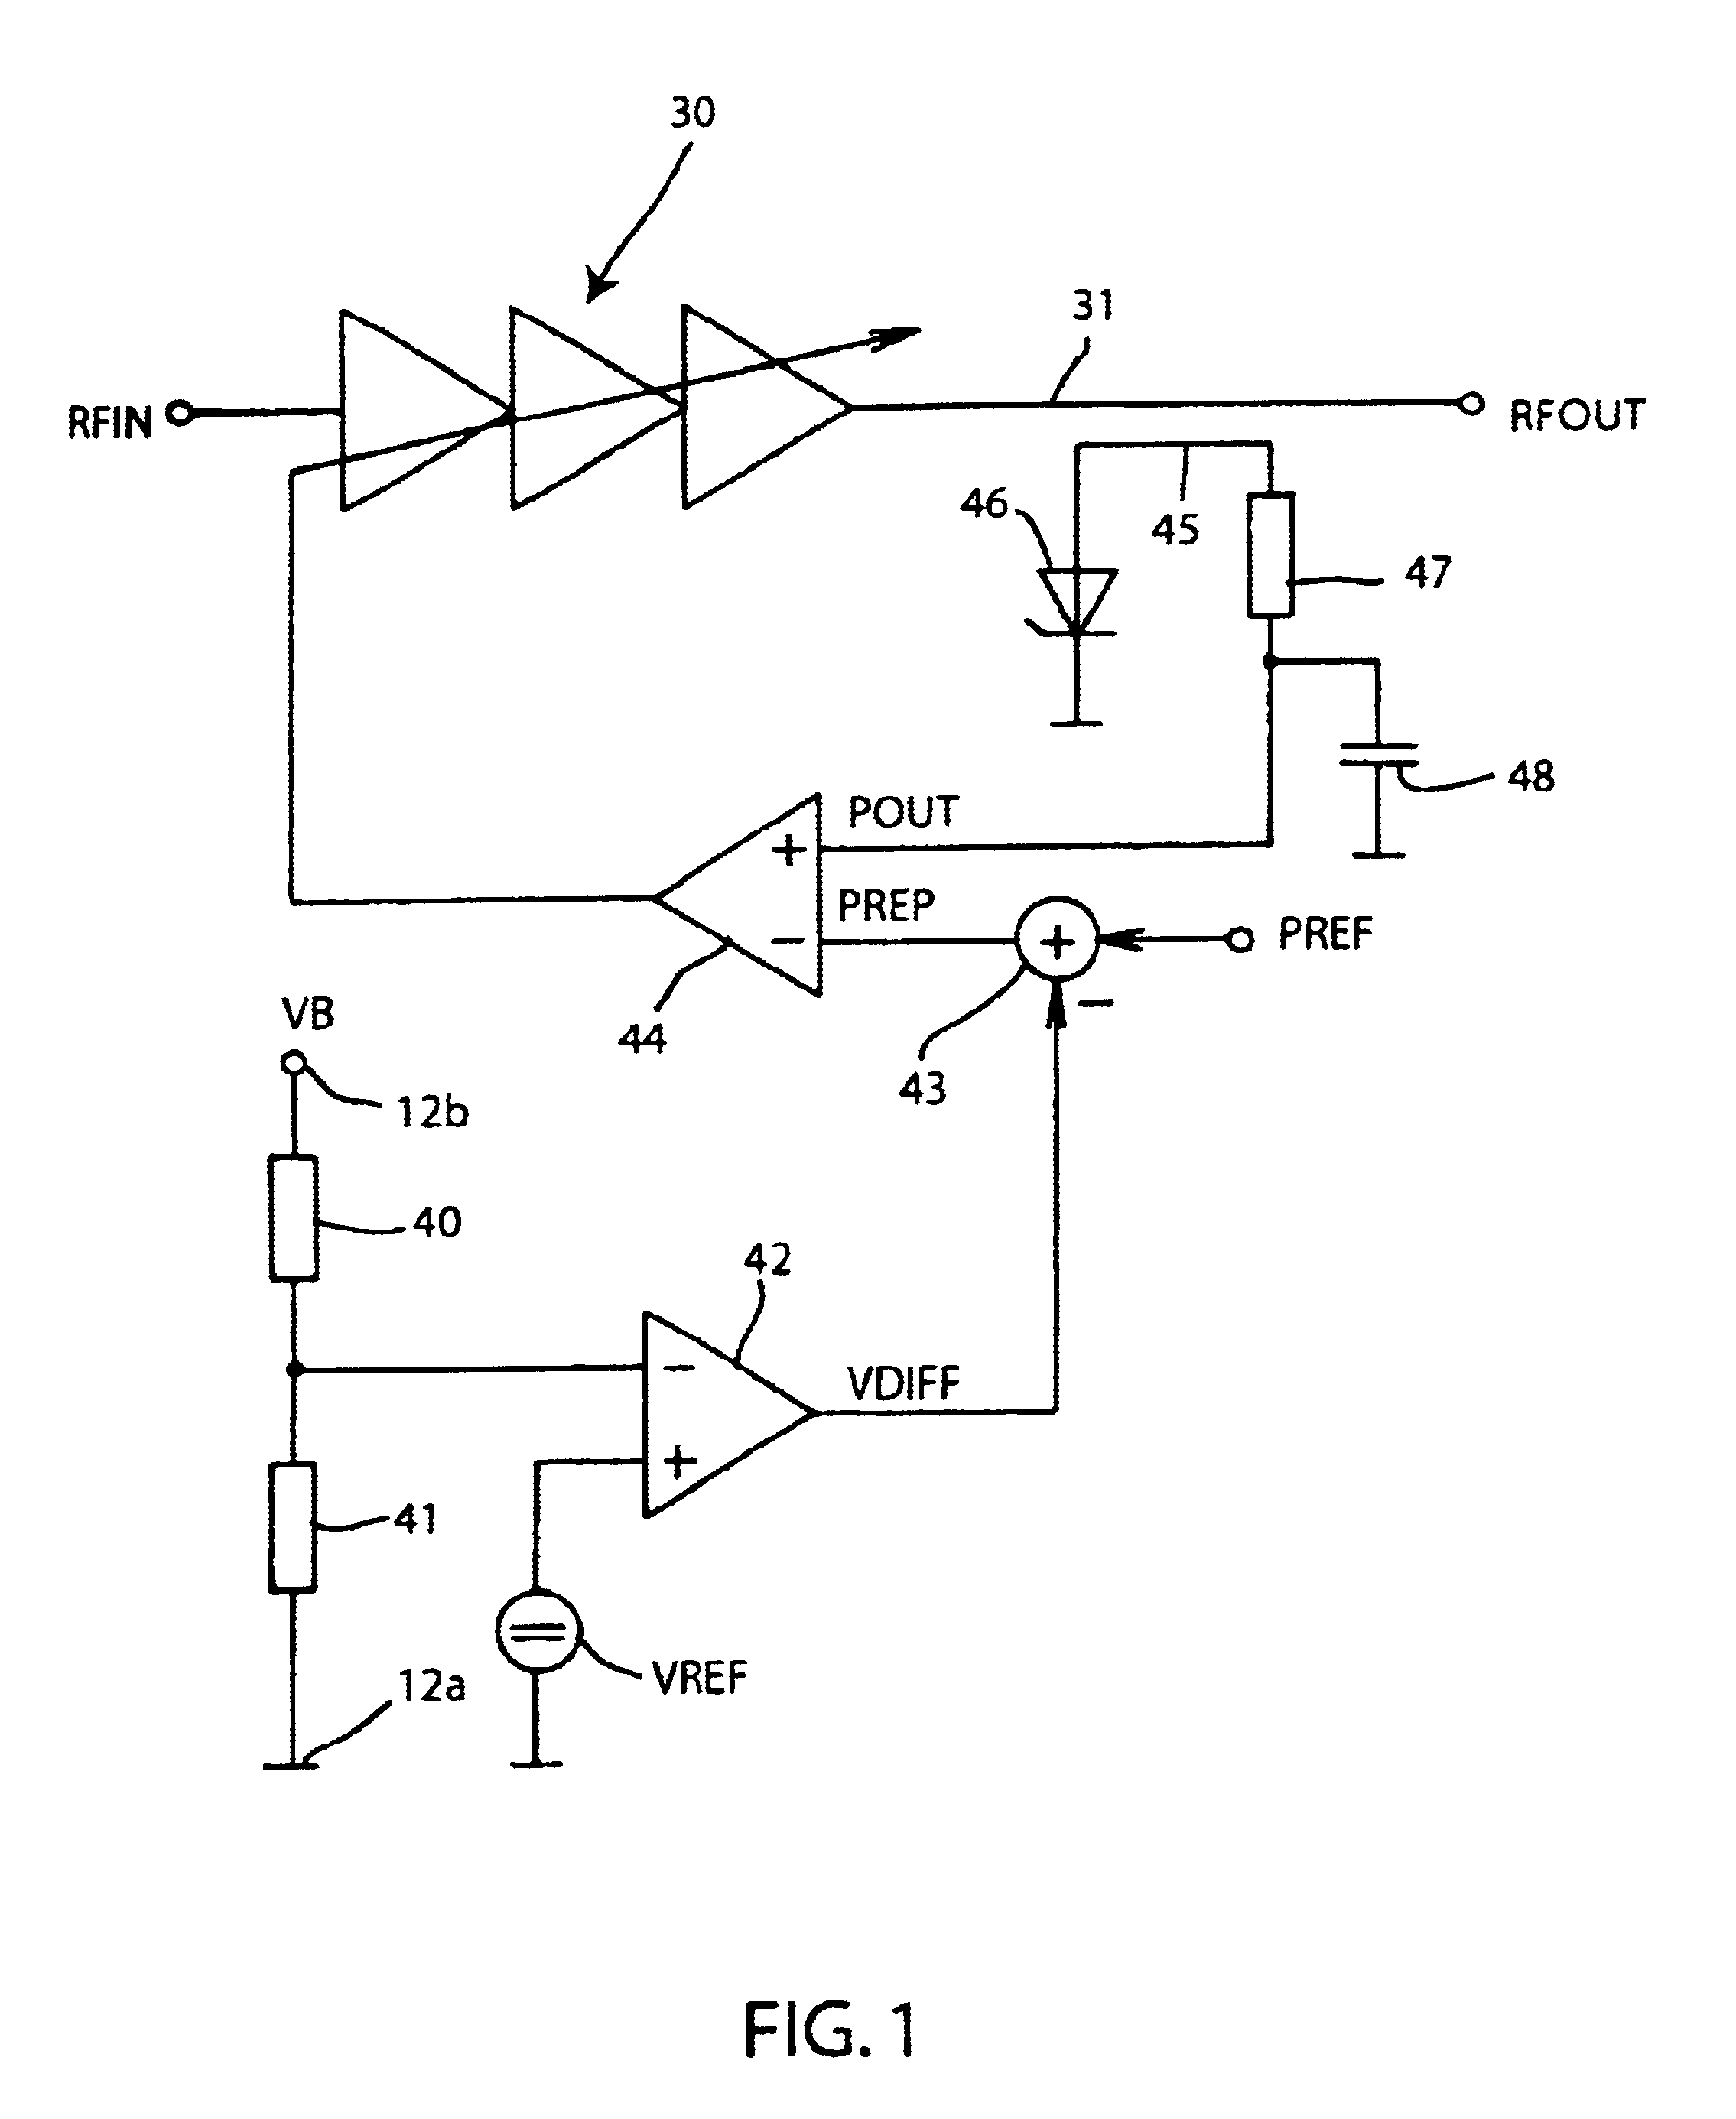 Circuit configuration for controlling the transmitting power of a battery-operated transceiver